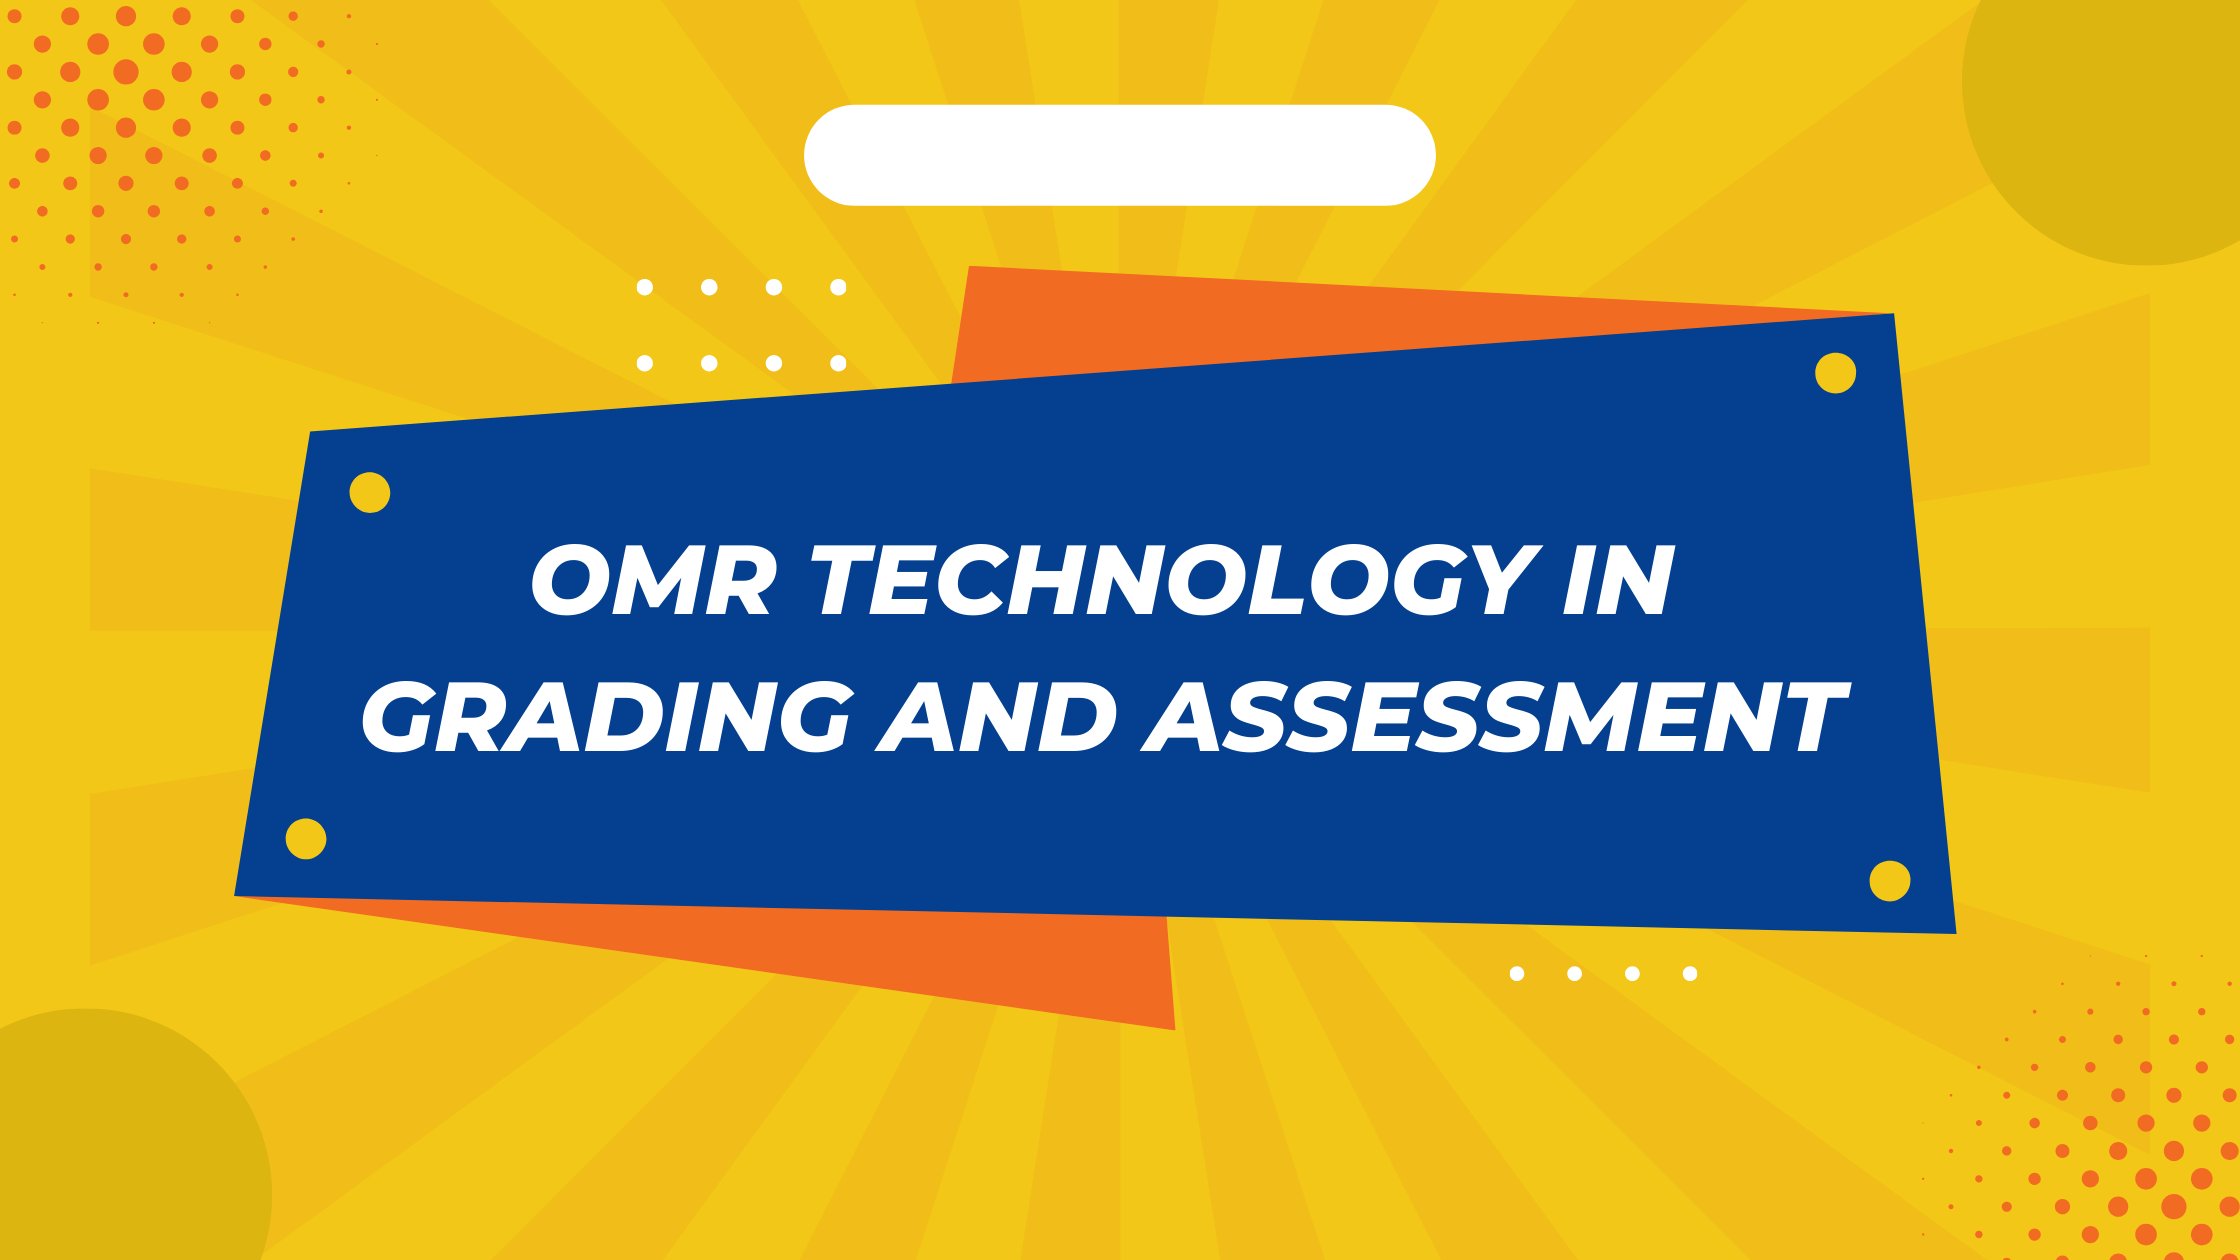 The Benefits Of OMR Technology In Grading And Assessment